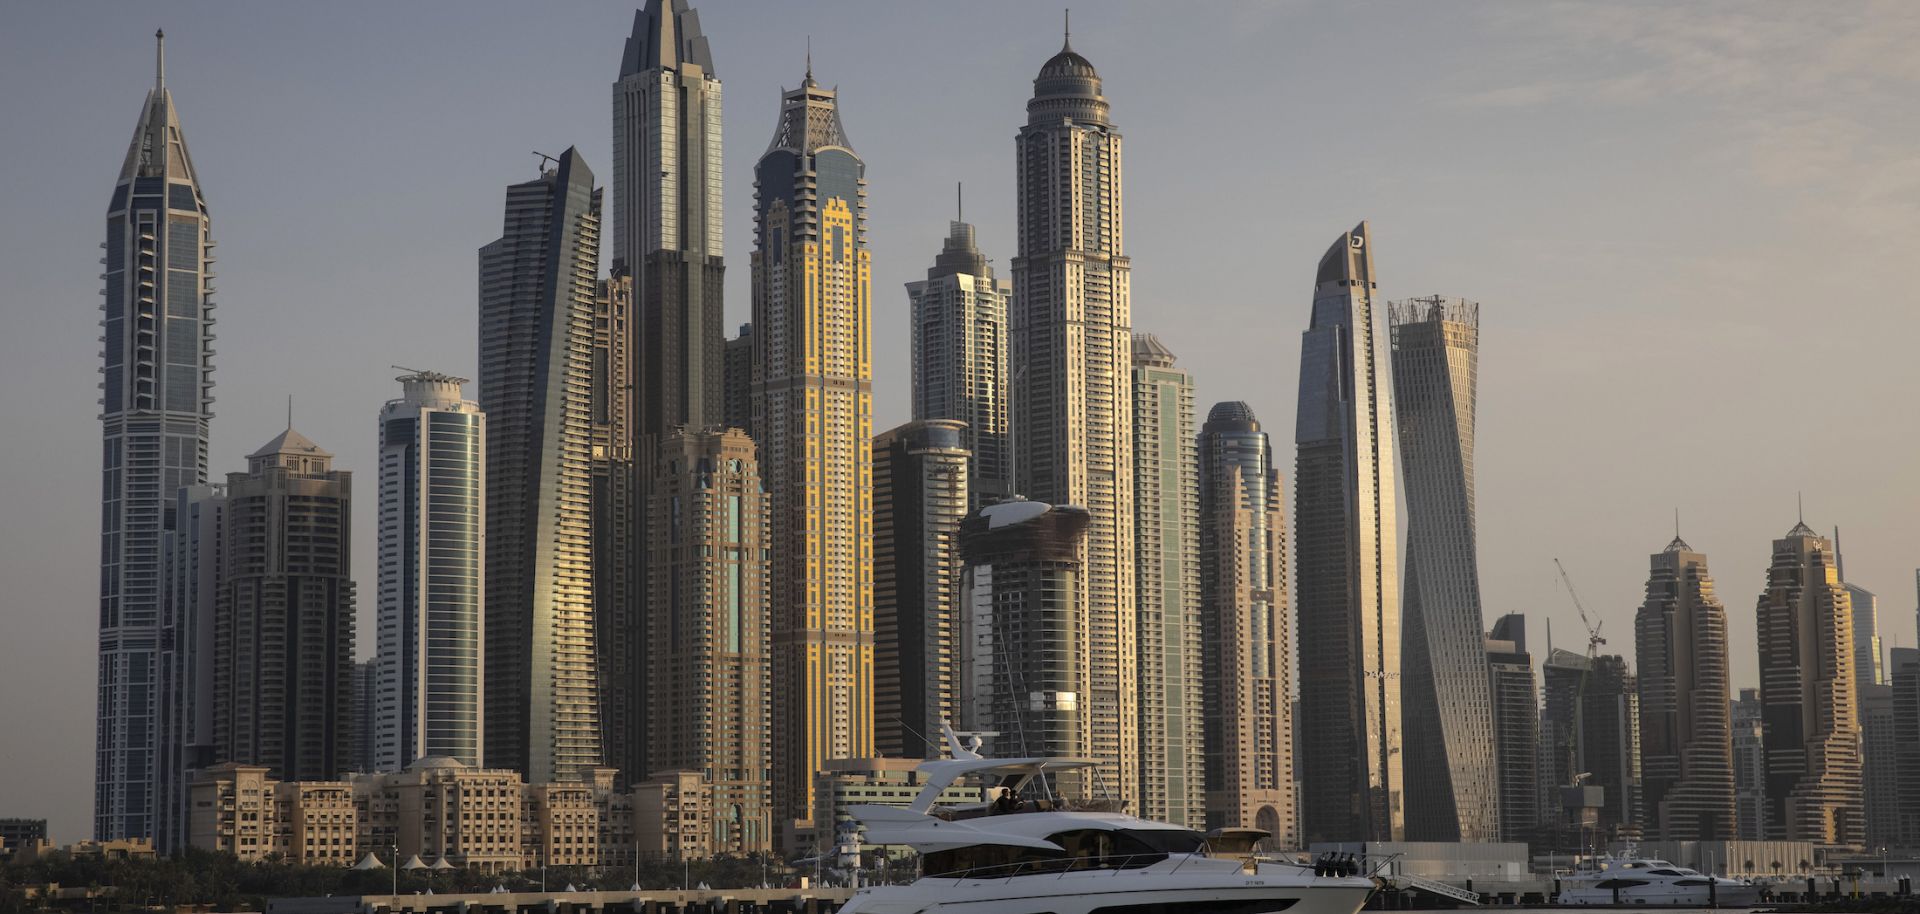  Dubai city skyline is seen from The Five hotel on The Palm on February 24, 2021 in Dubai, United Arab Emirates